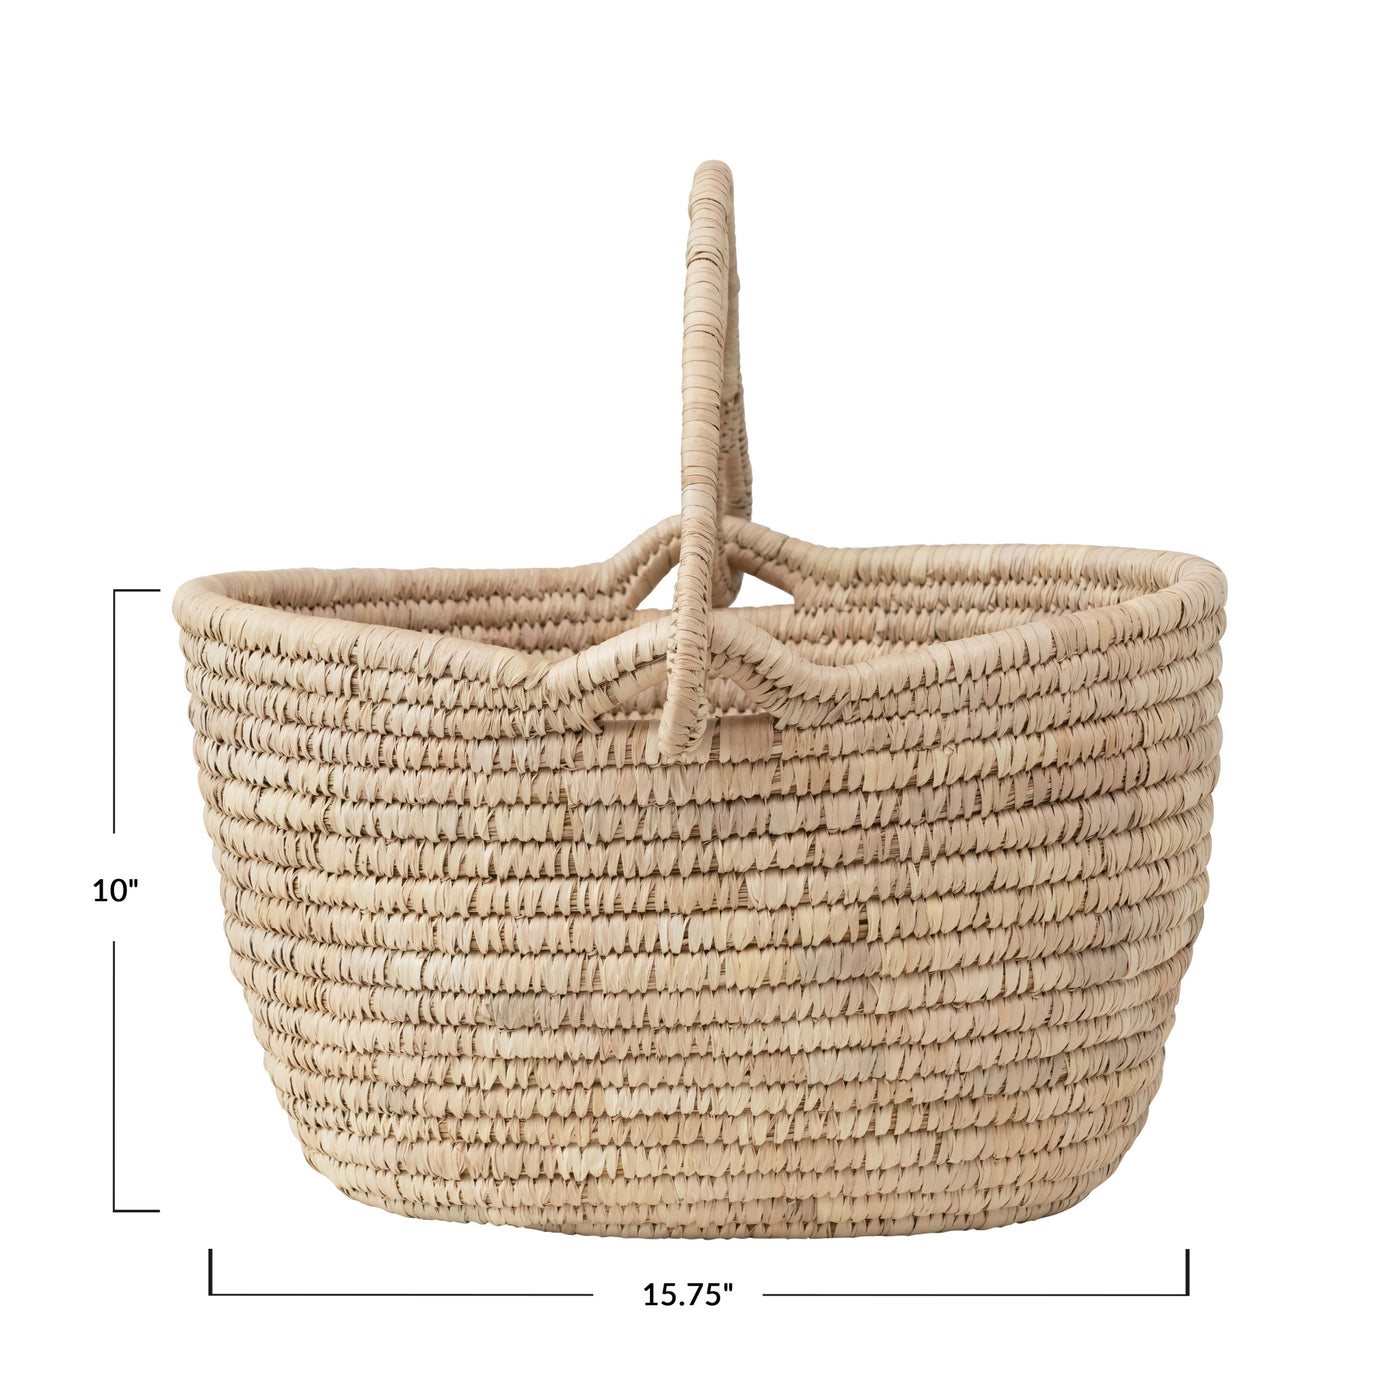 Oval Hand-Woven Basket with Handle